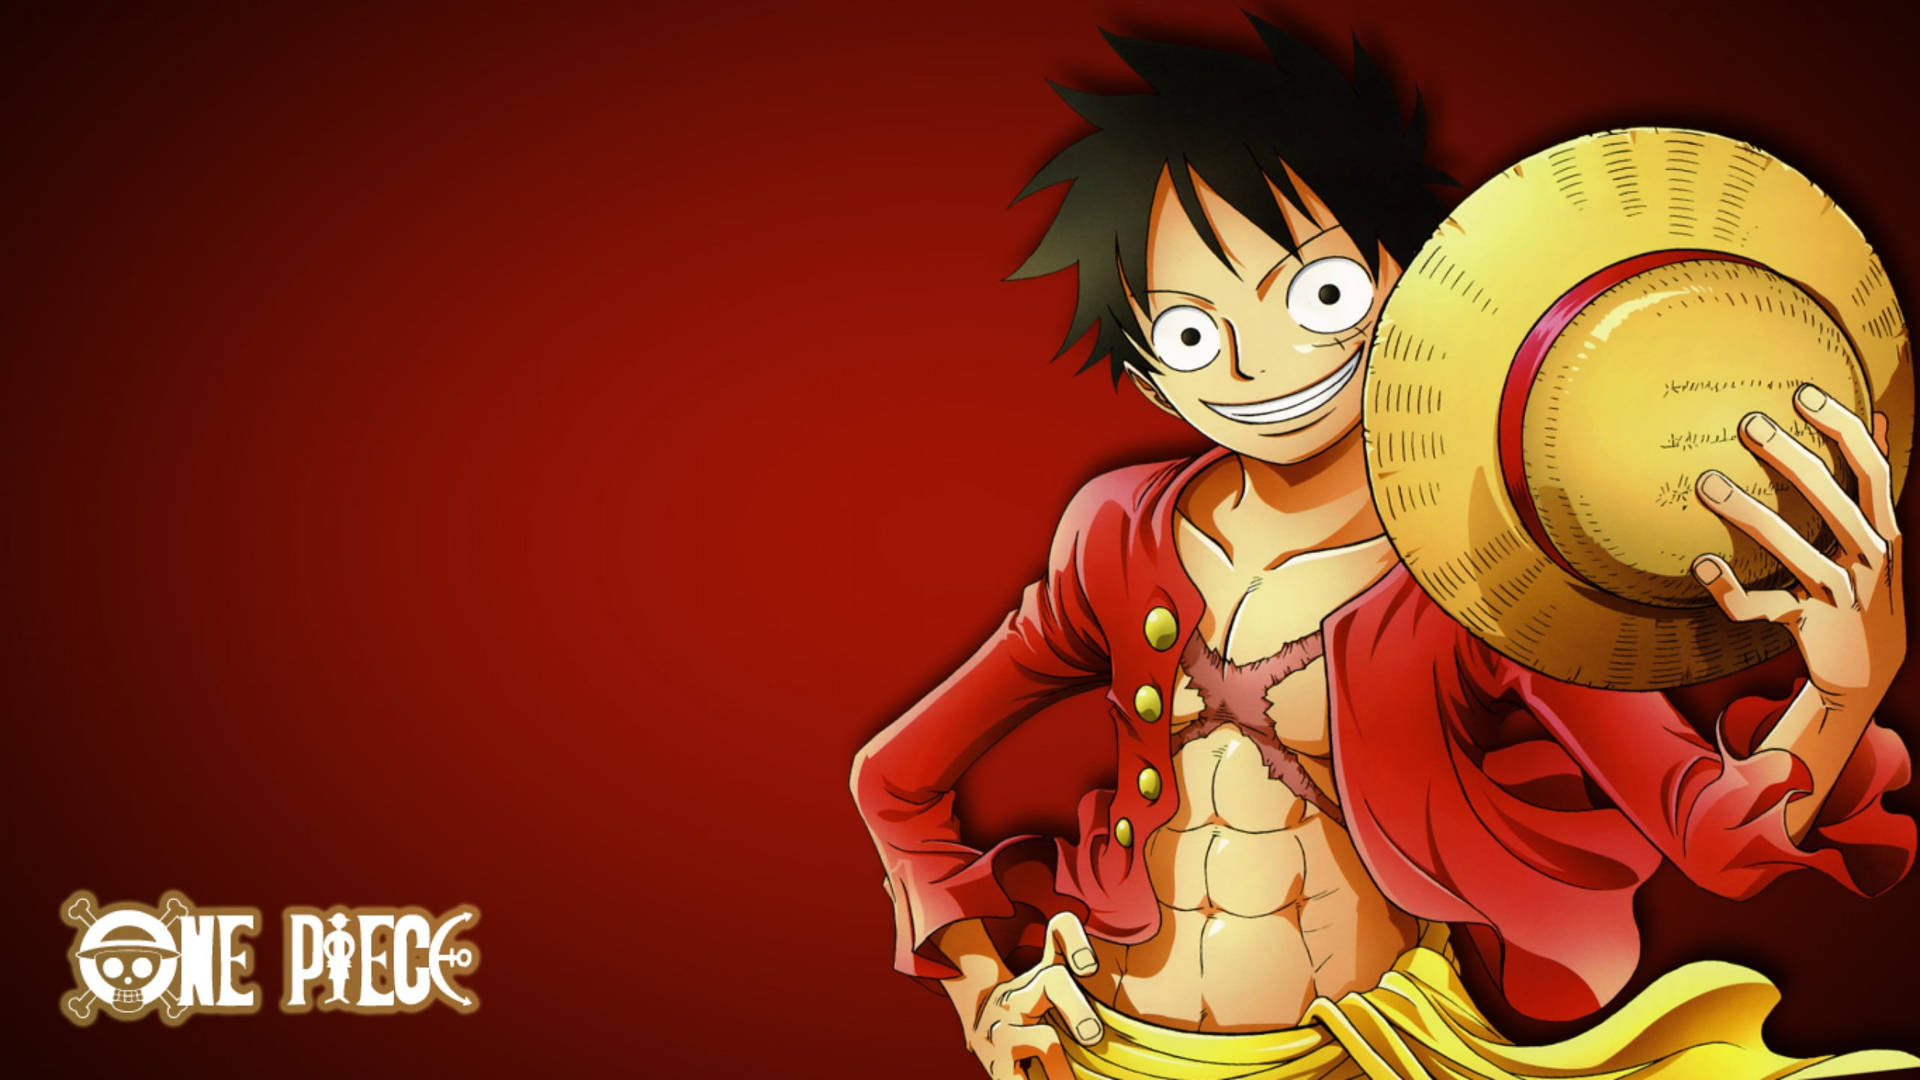 3840X2160 Monkey D Luffy Wallpaper and Background